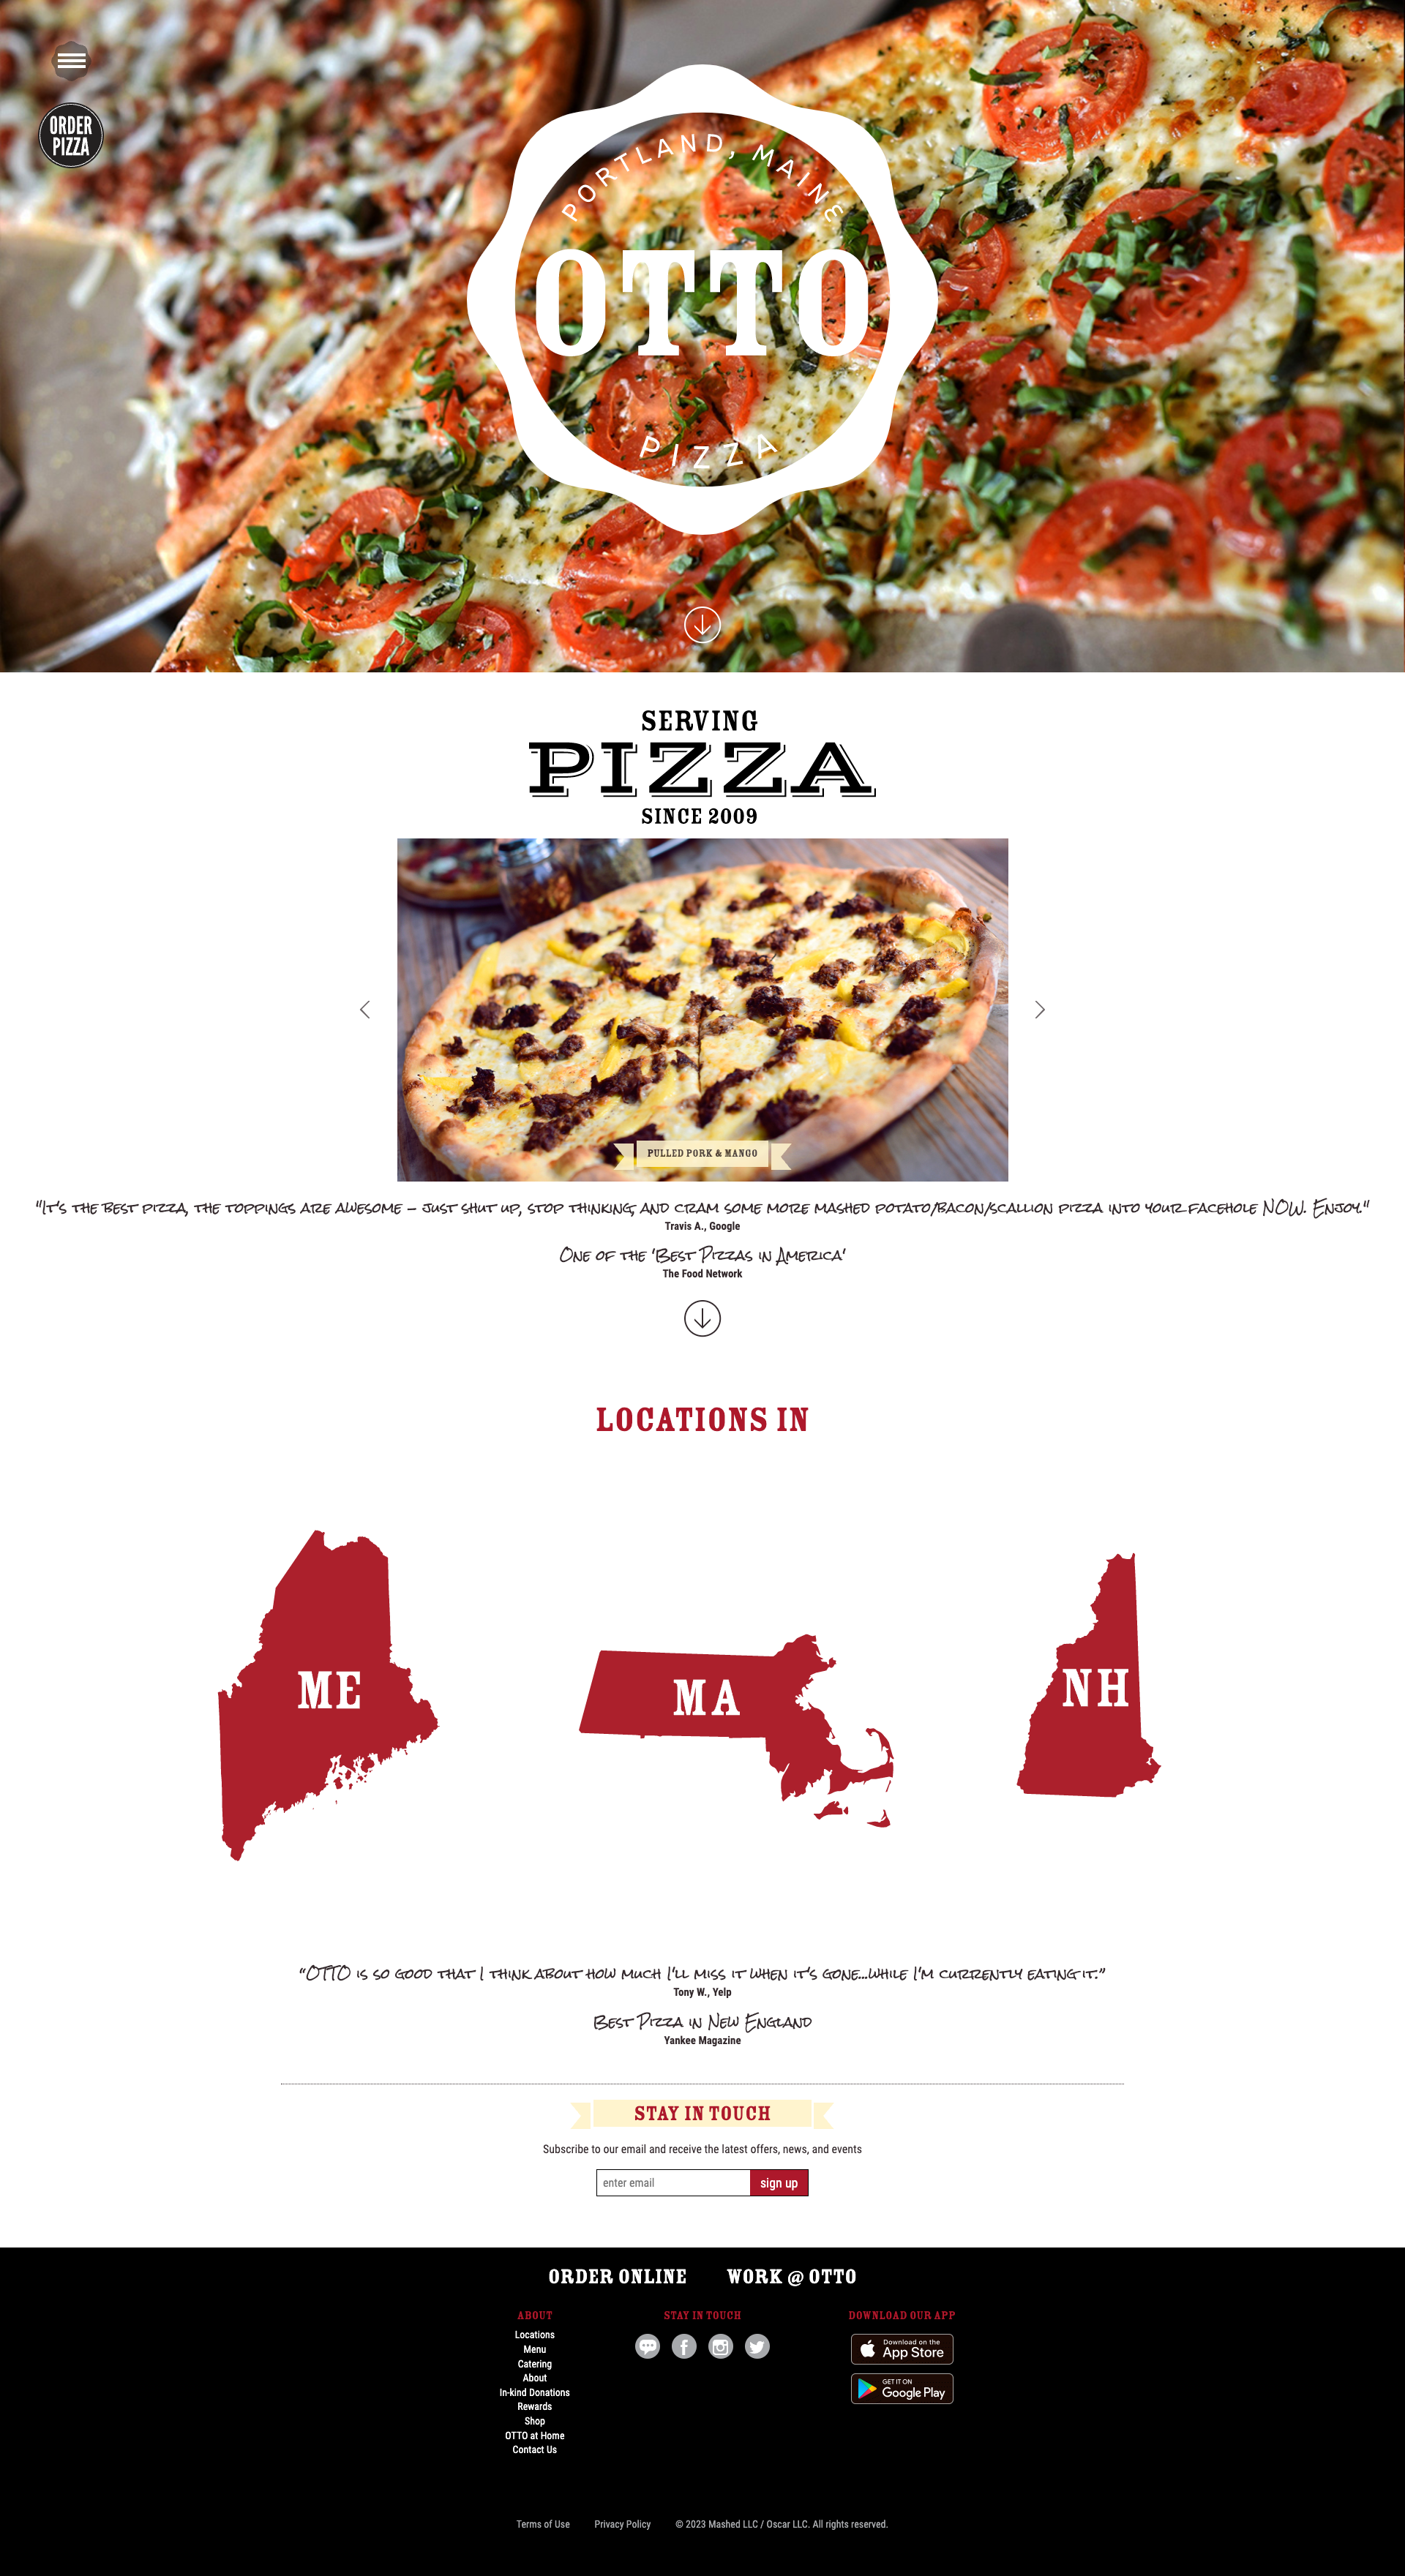 A full-page screenshot of the OTTO Pizza website